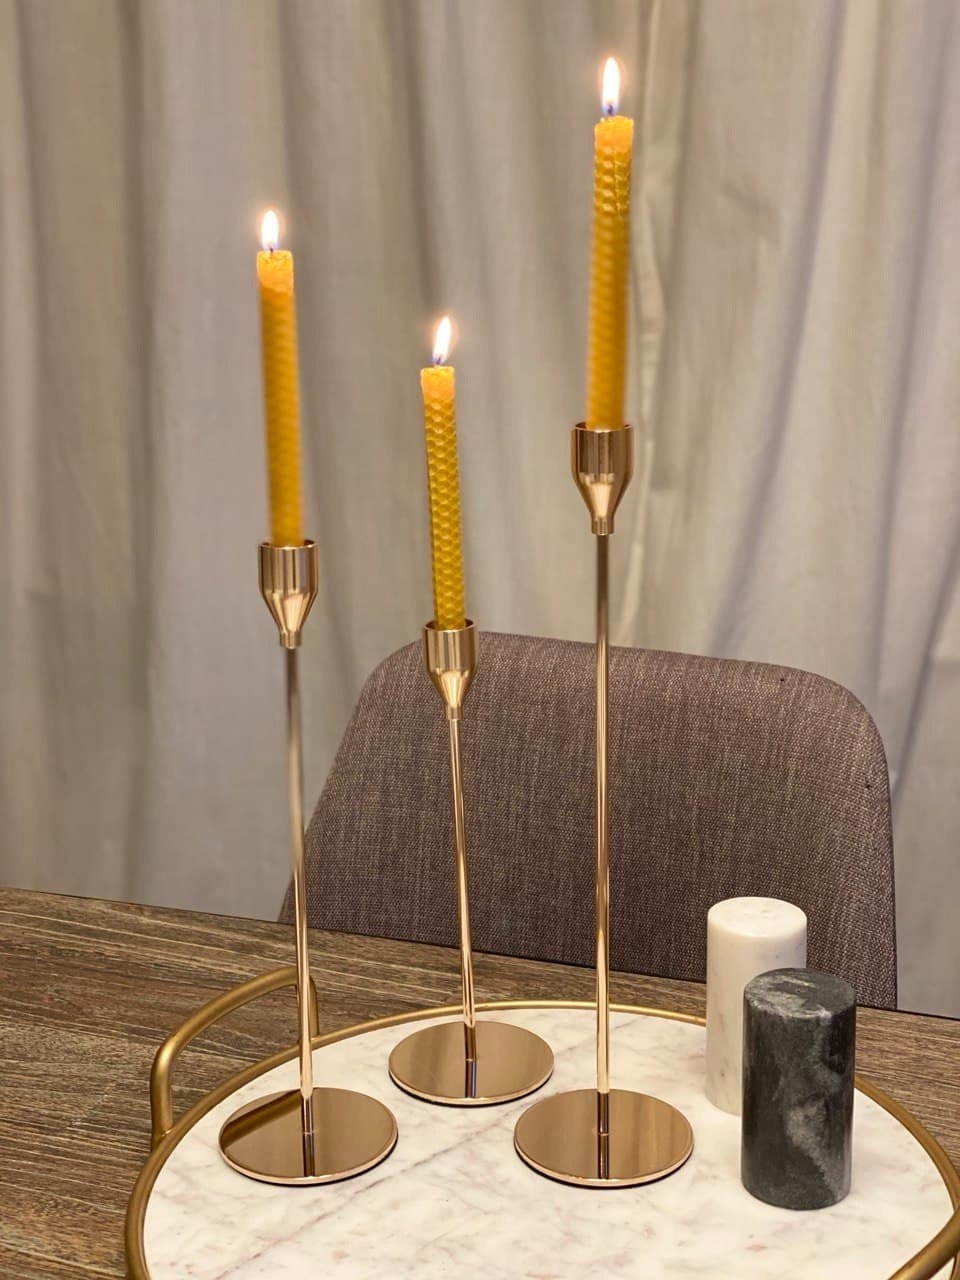 The candle sticks on a tray